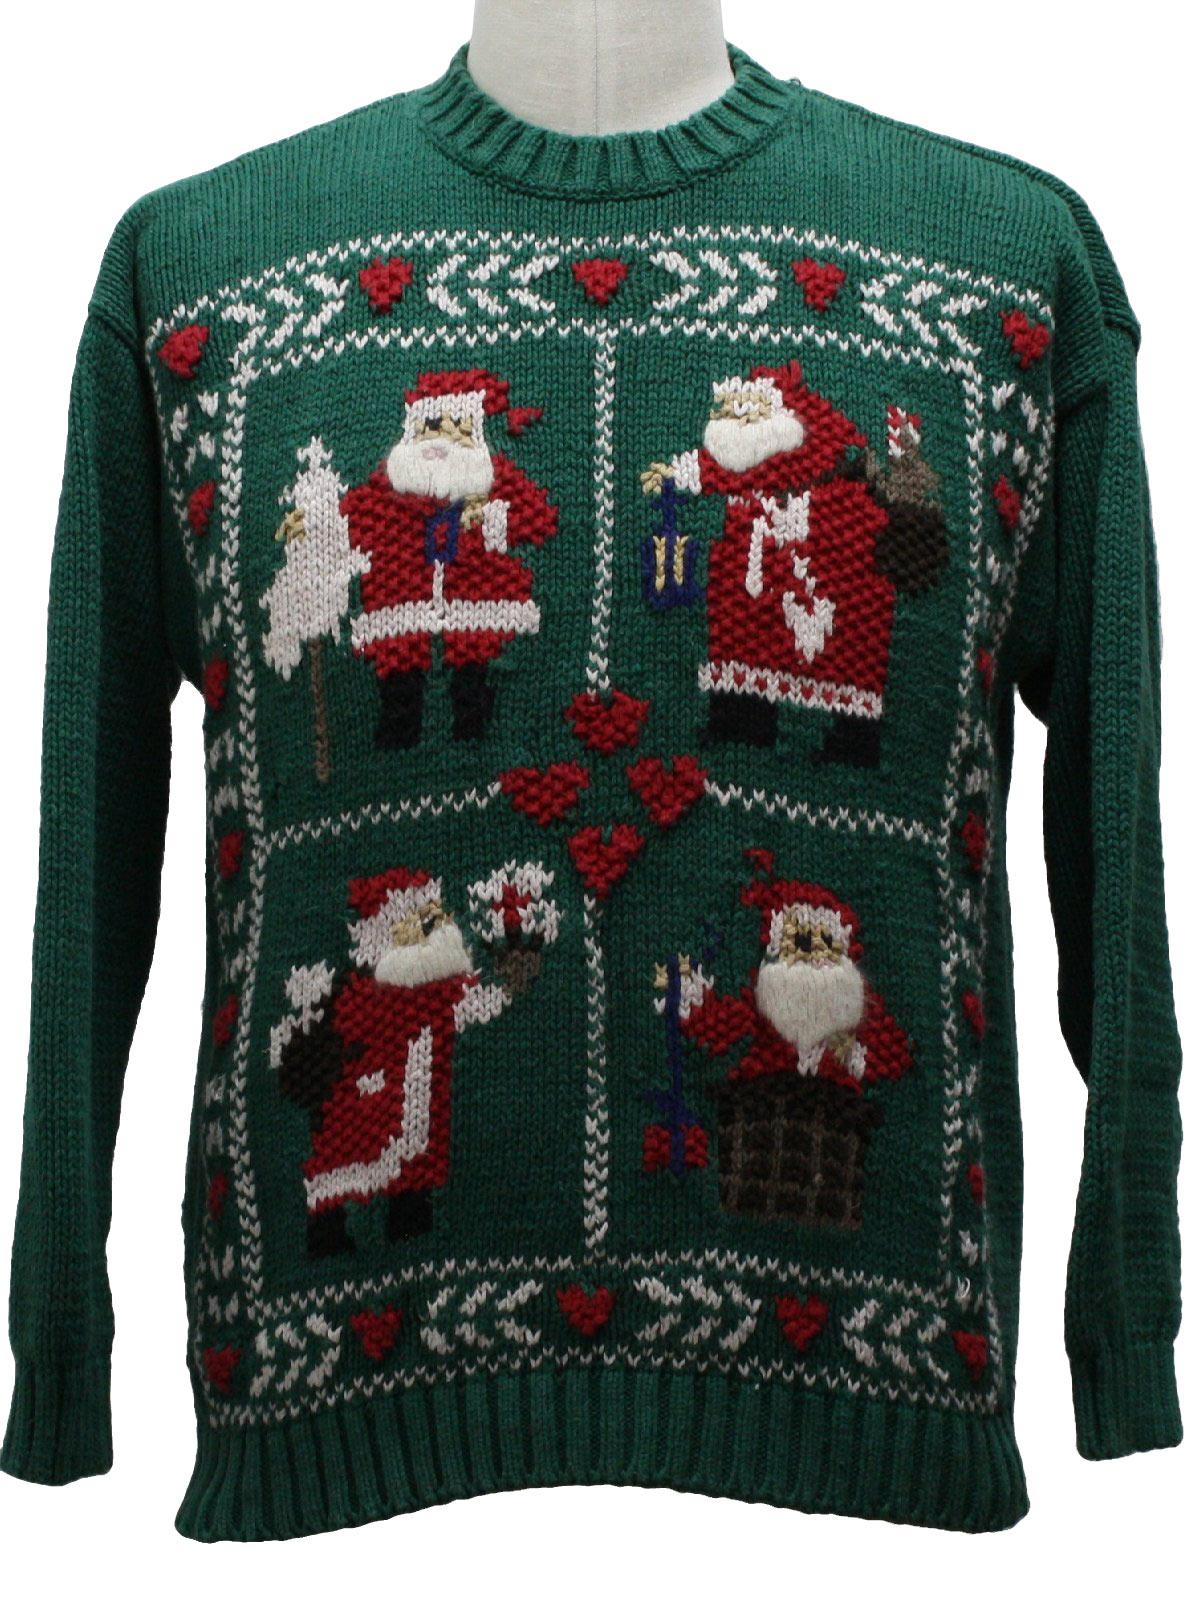 Country Kitsch Ugly Christmas Sweater: -Wip Stitch- Unisex green ...